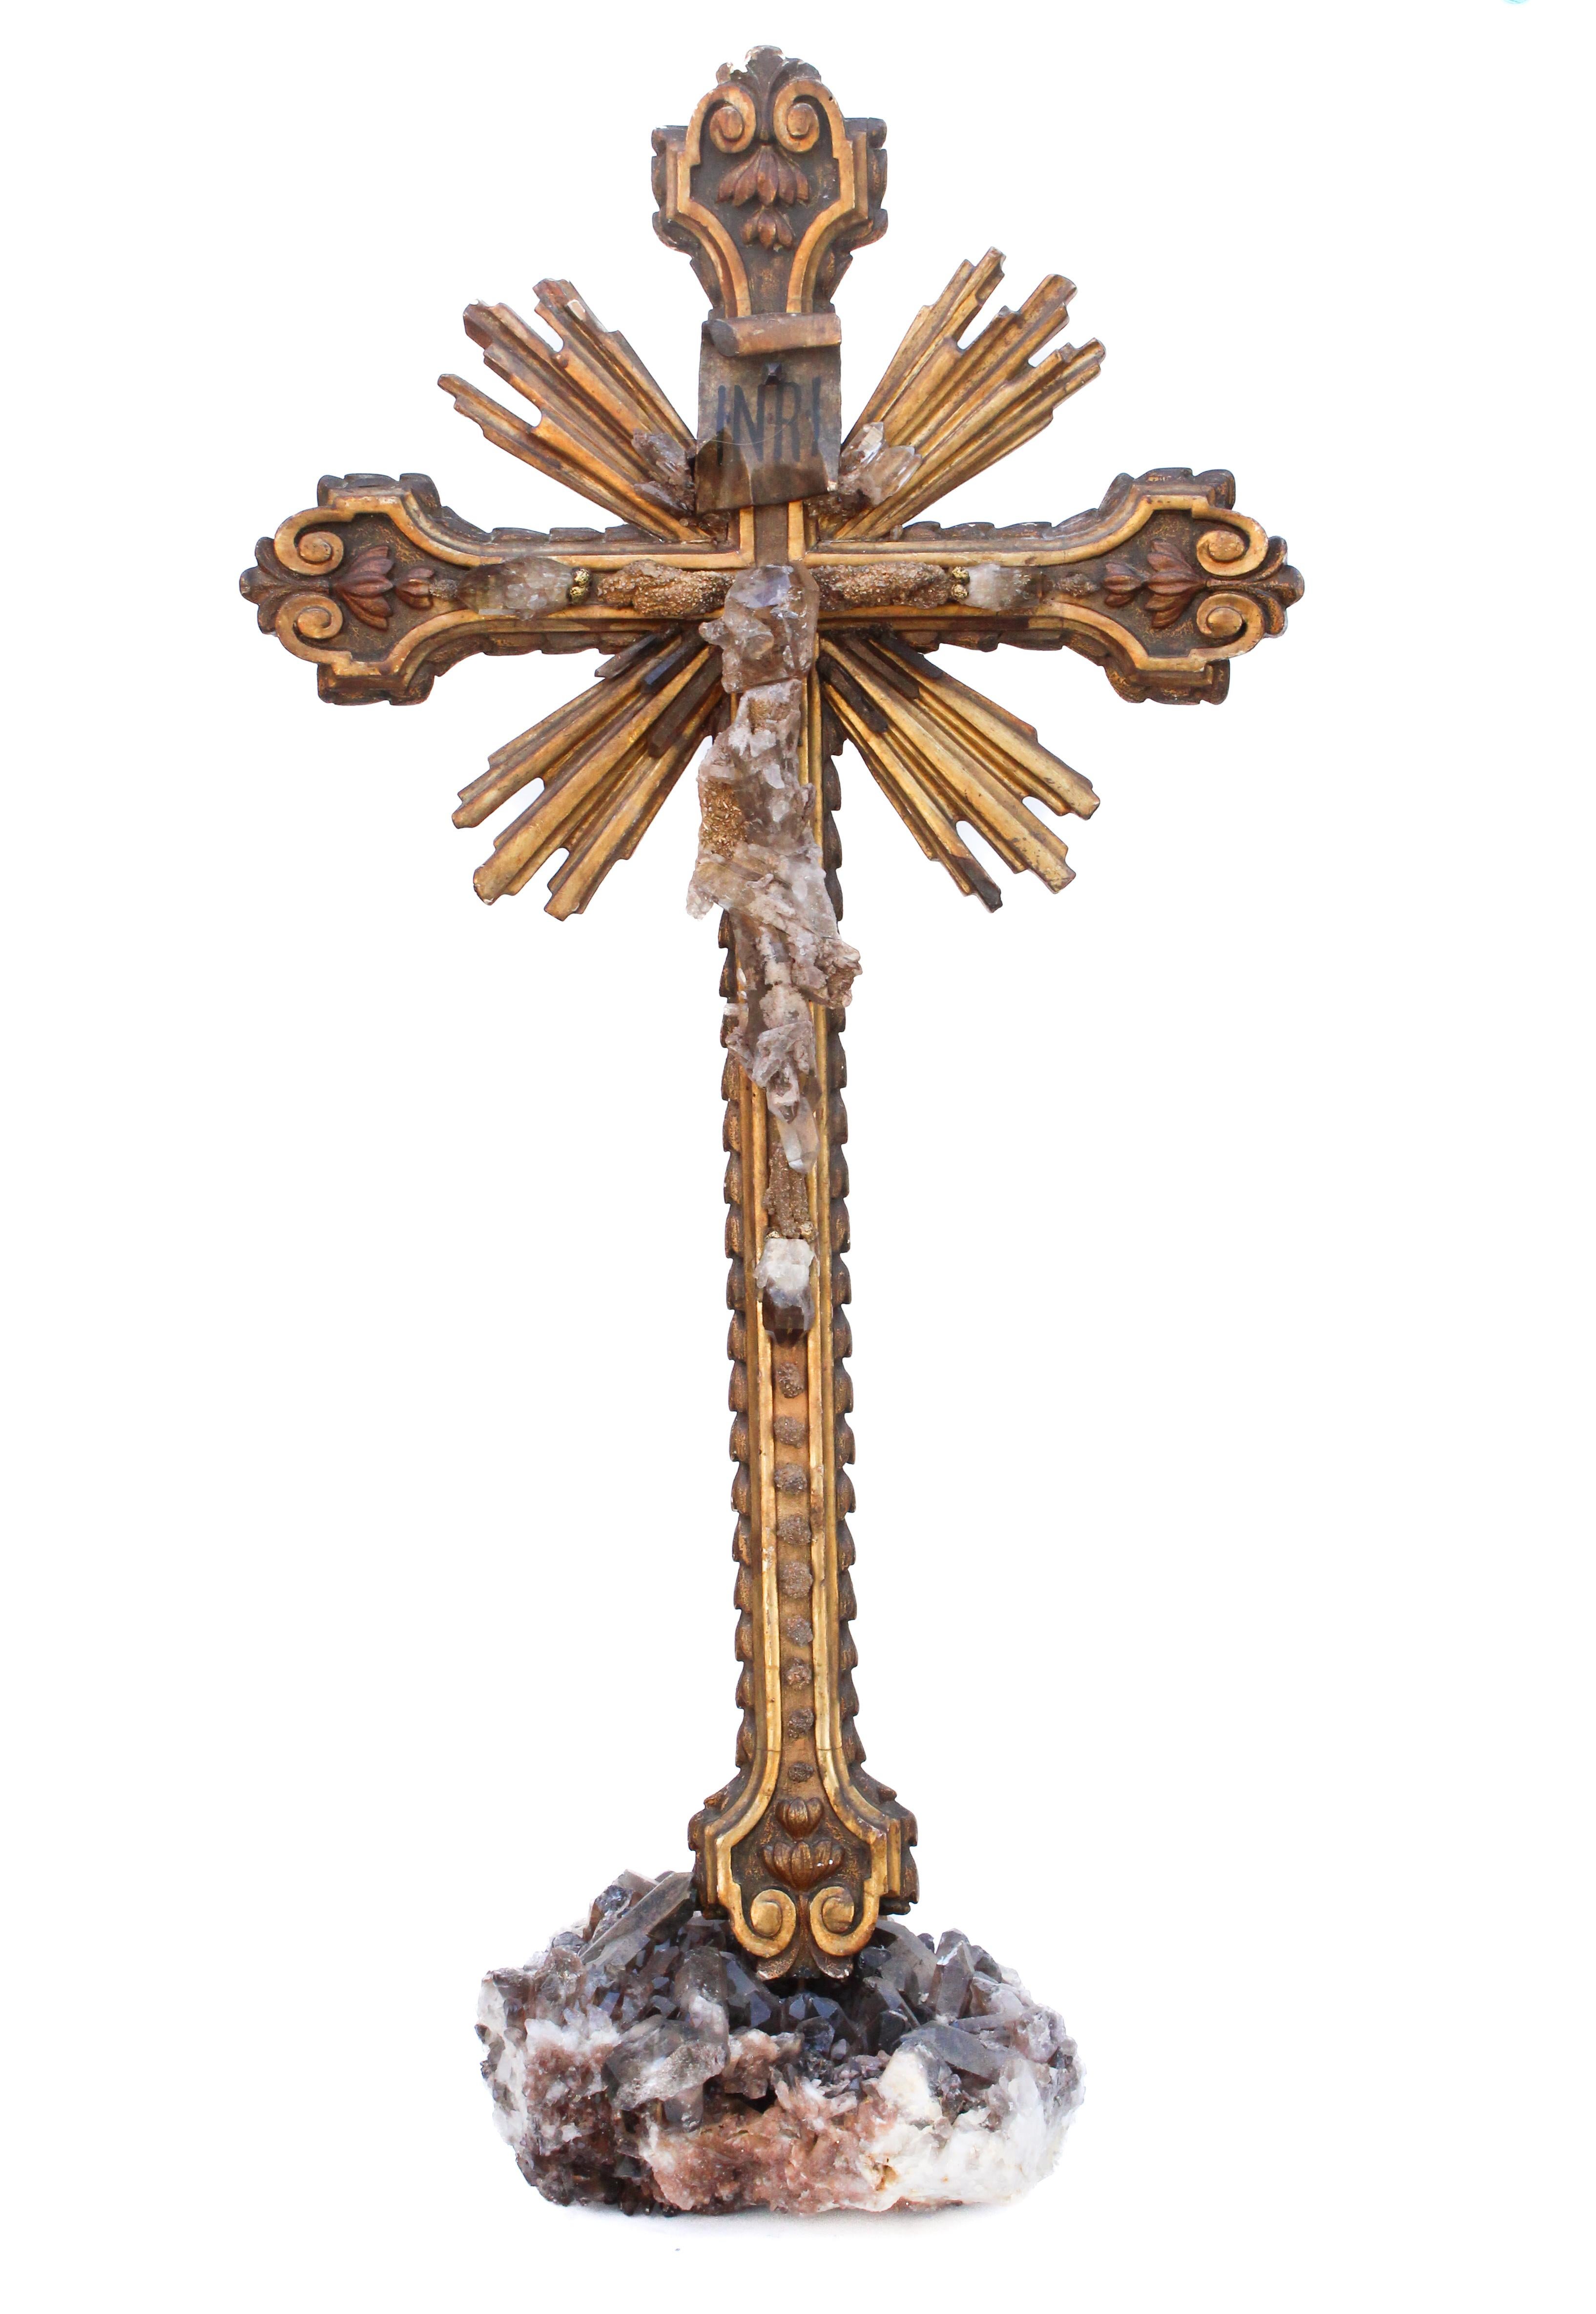 18th century Italian brown and gilded cross adorned with smoky quartz crystals and druzy petrified wood. The smoky quartz crystals are from Madagascar and druzy petrified wood from the United States. The smoky quartz crystals are put together to